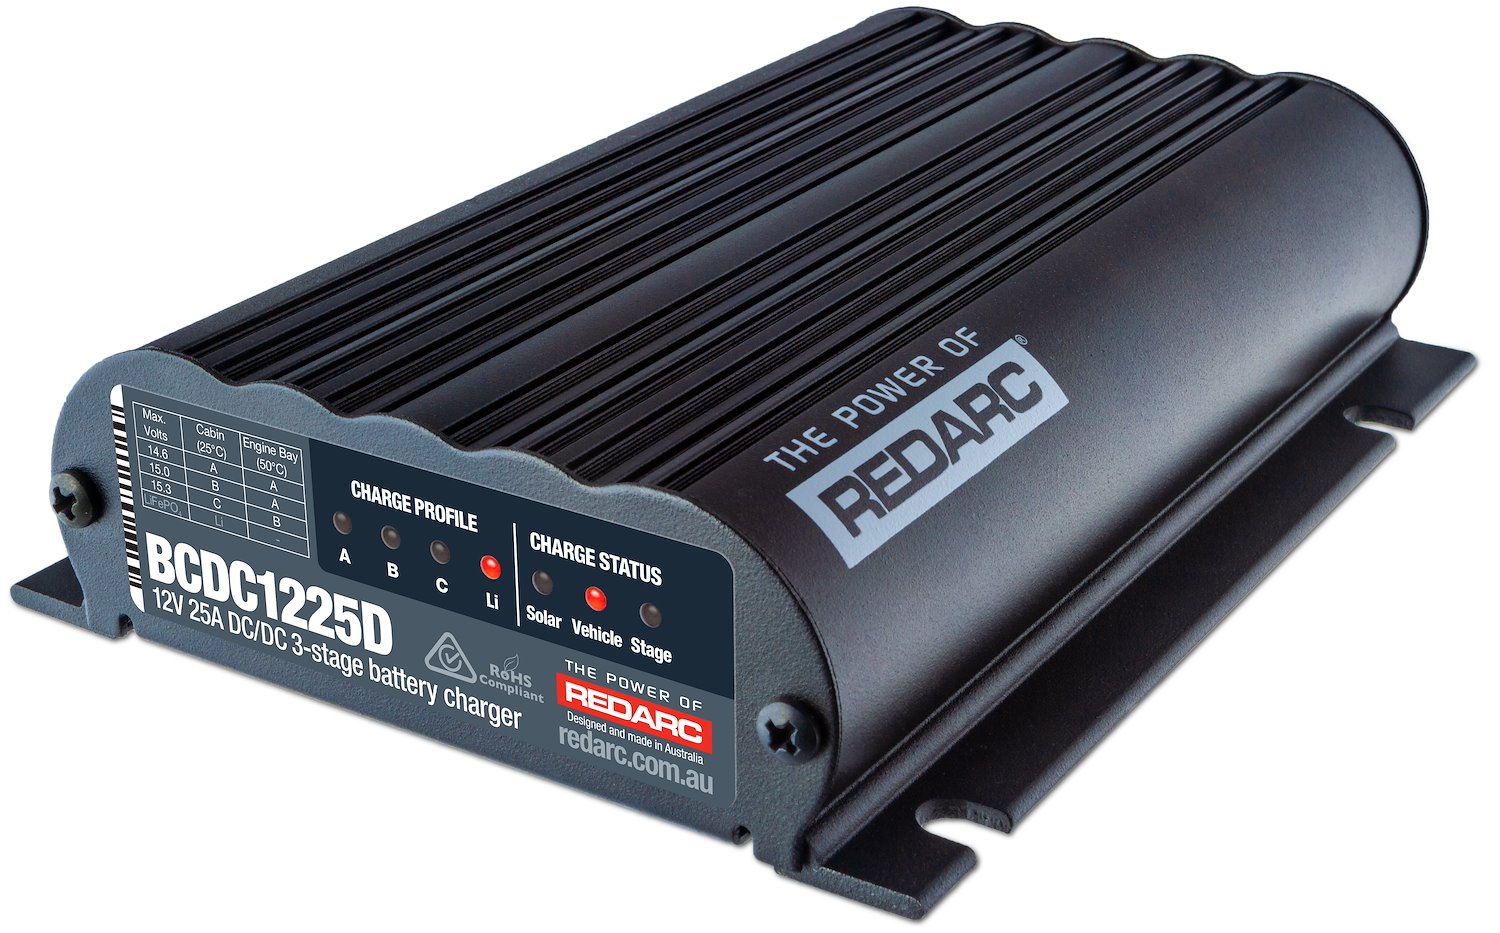 BCDC1225D 12 V In-Vehicle DC-DC Battery Charger, 25 Amp